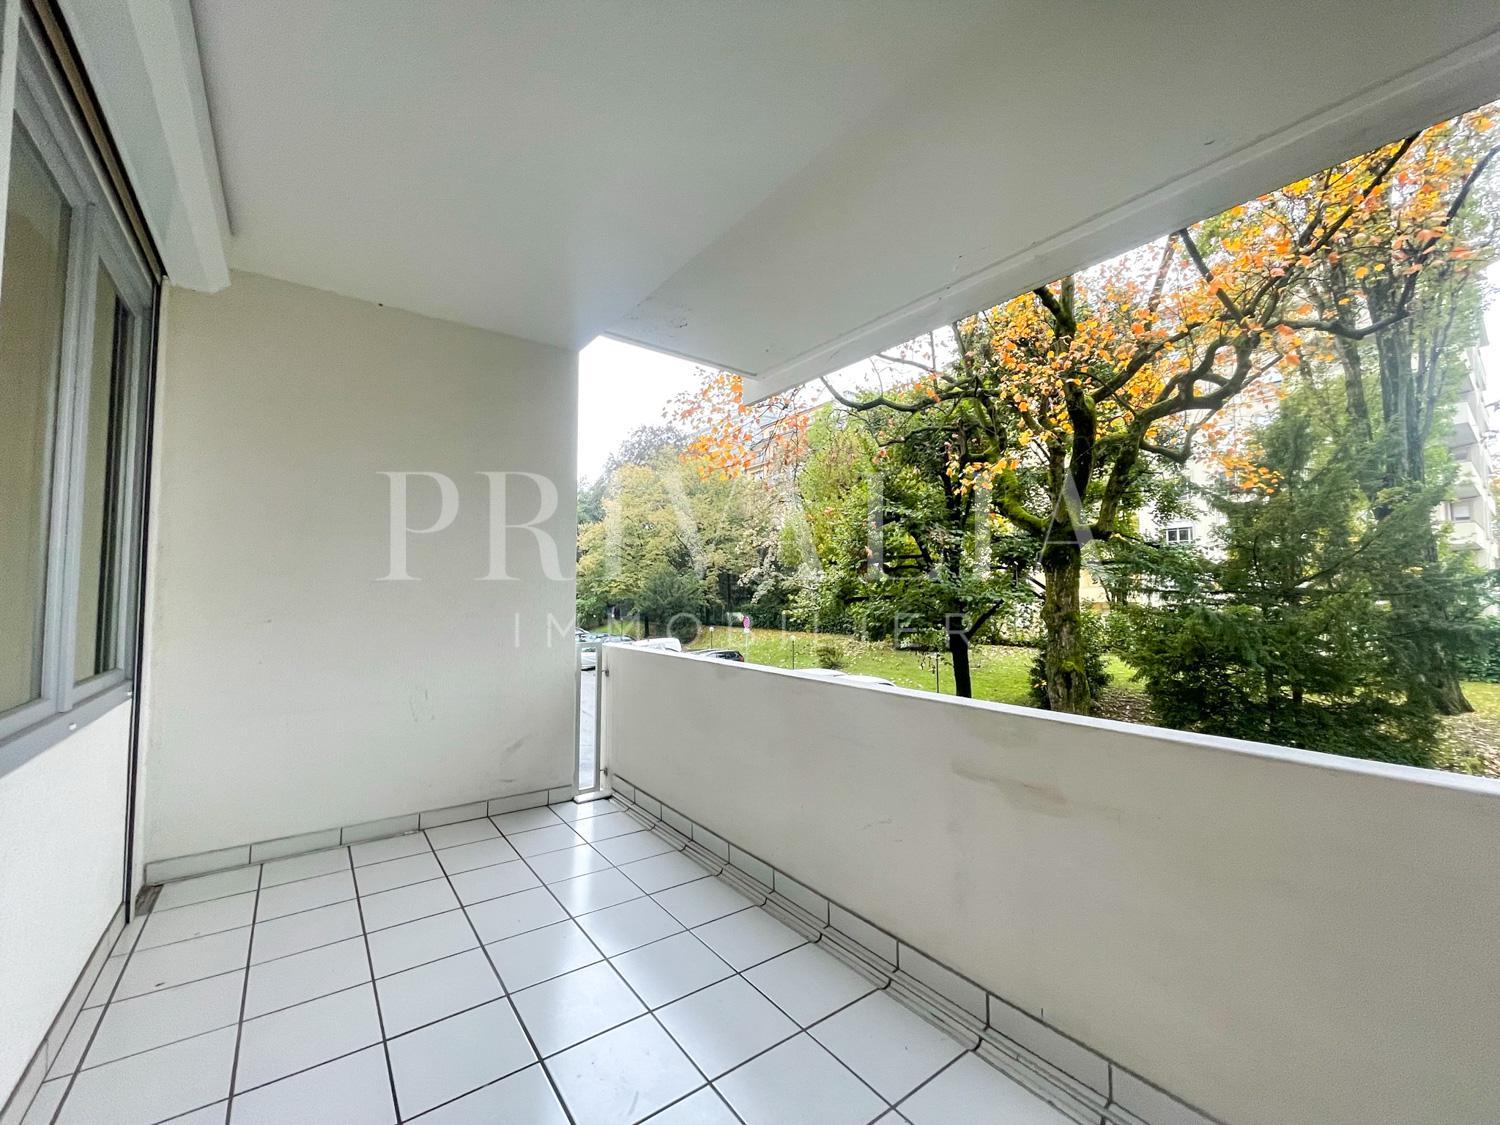 PrivaliaExclusivity : Crossing 3 rooms apartment with 2 balconies and box in basement